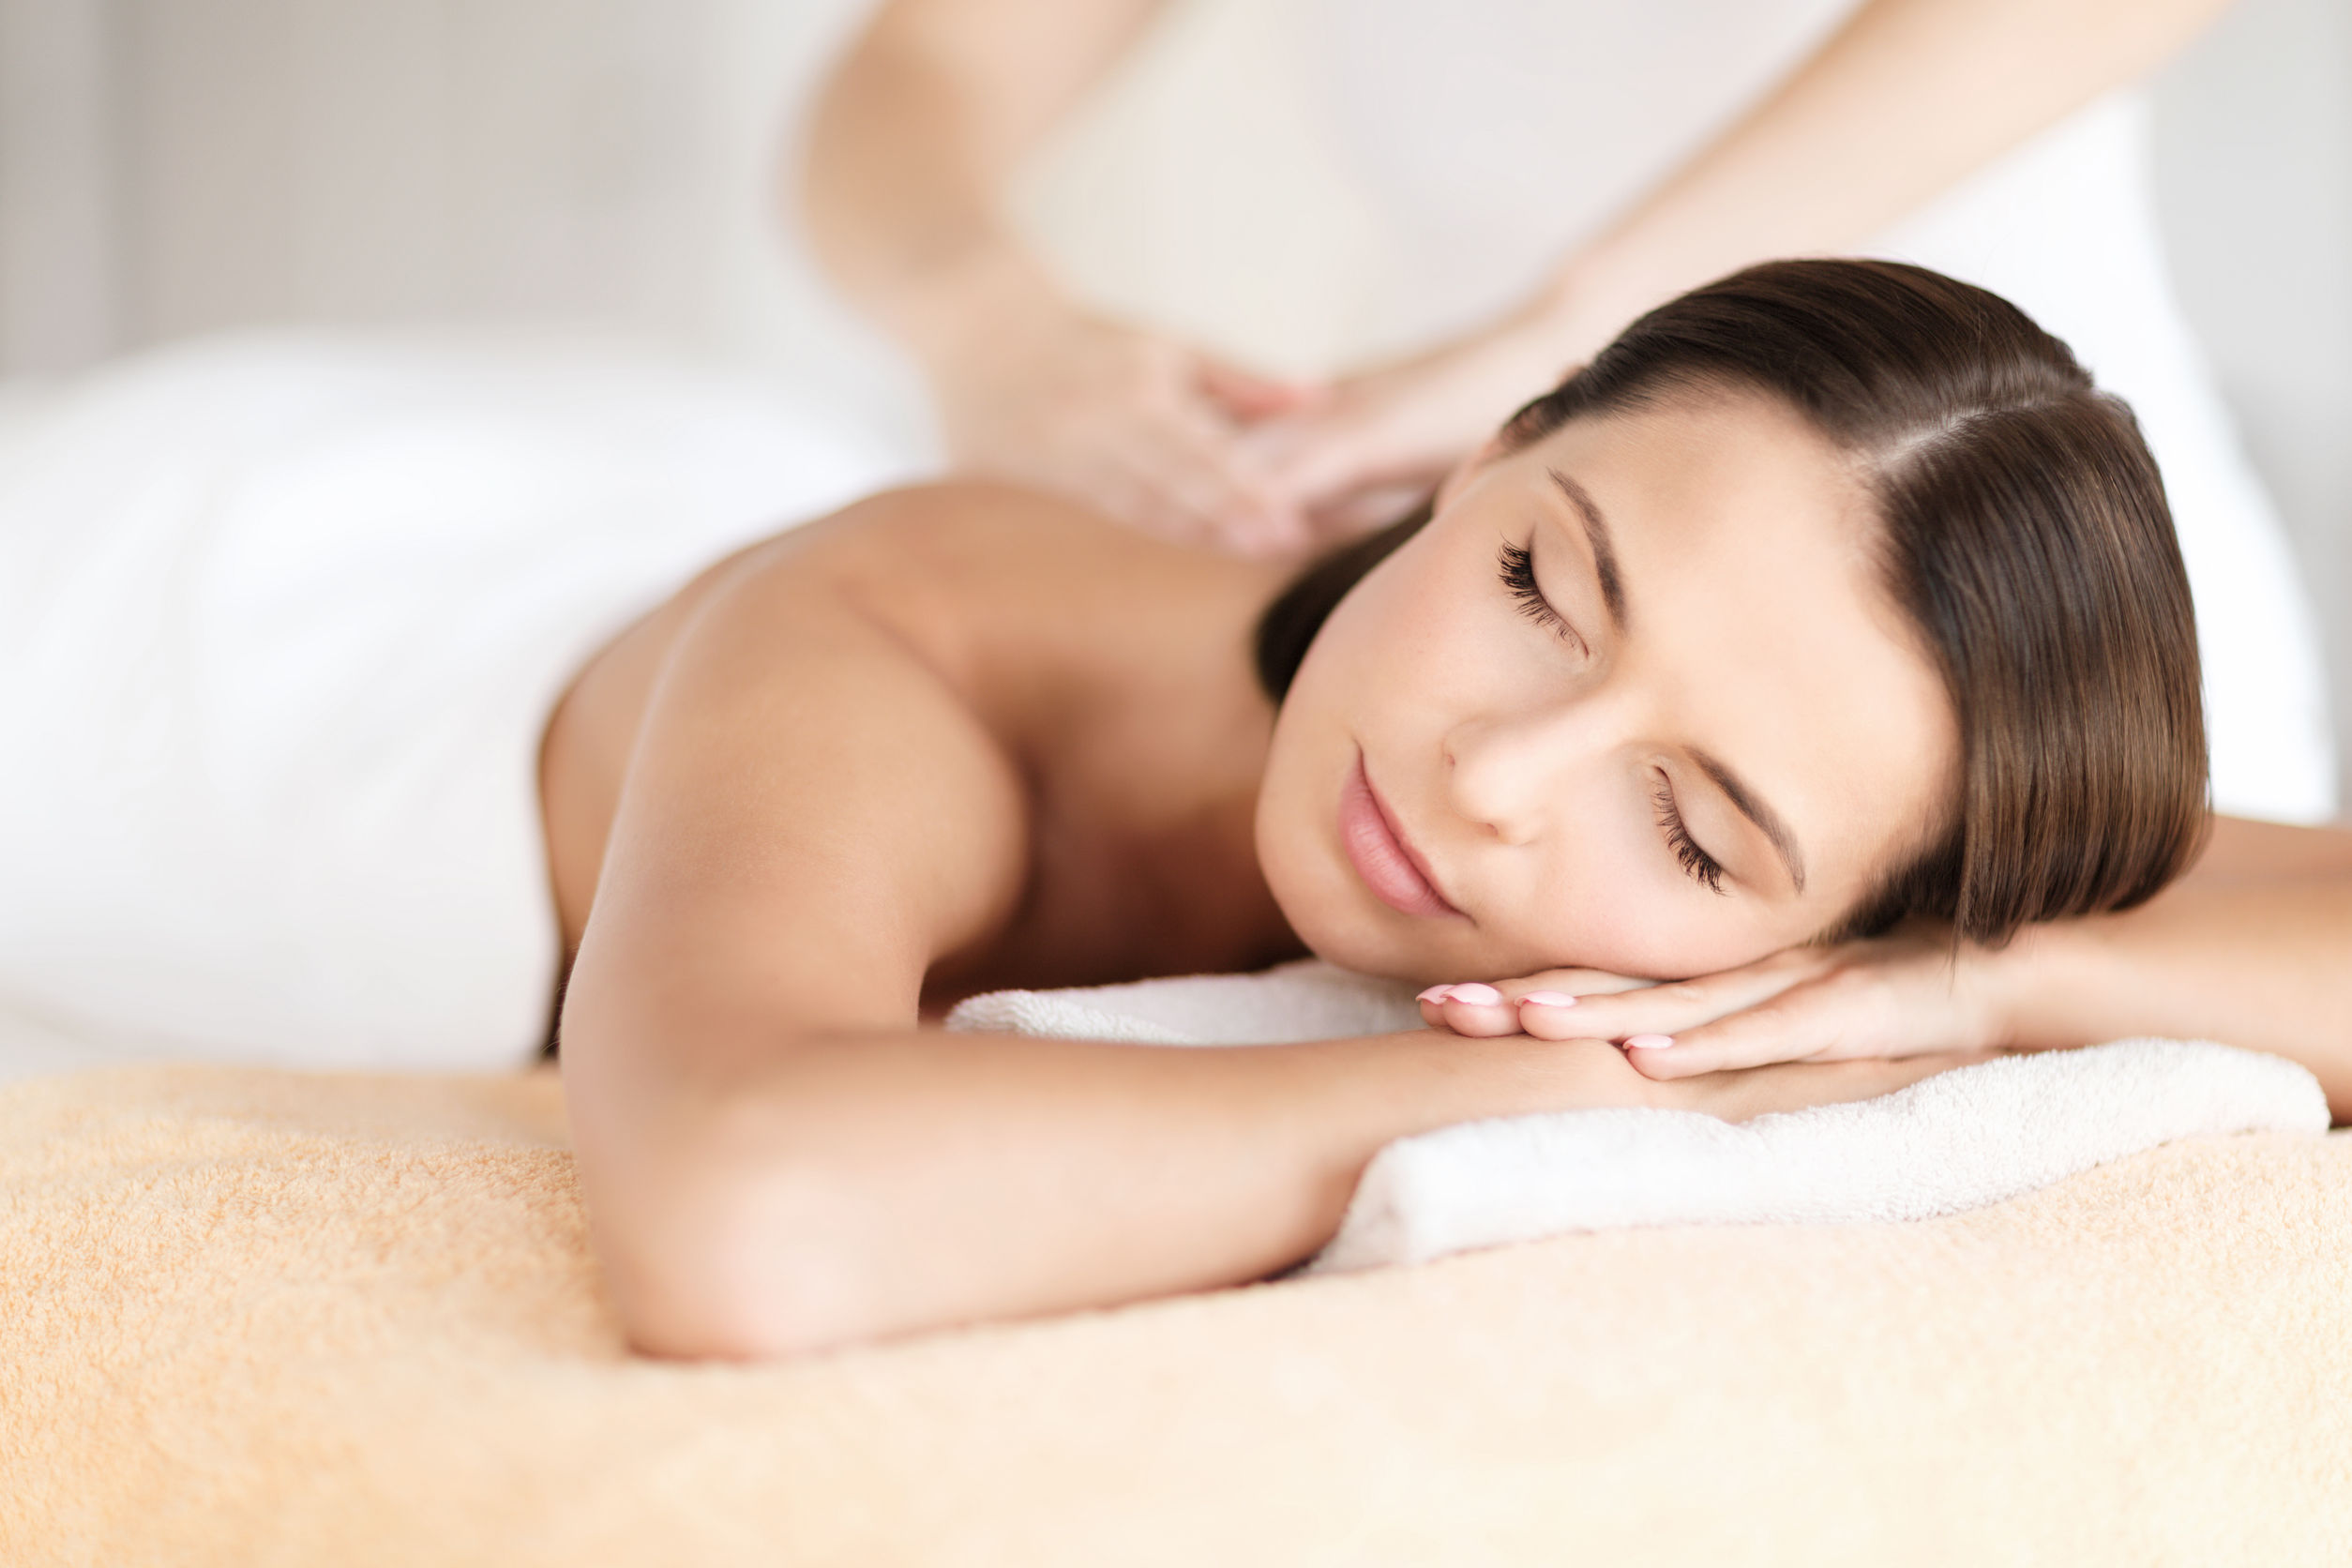 35173934 - health, beauty, resort and relaxation concept - beautiful woman with closed eyes in spa salon getting massage